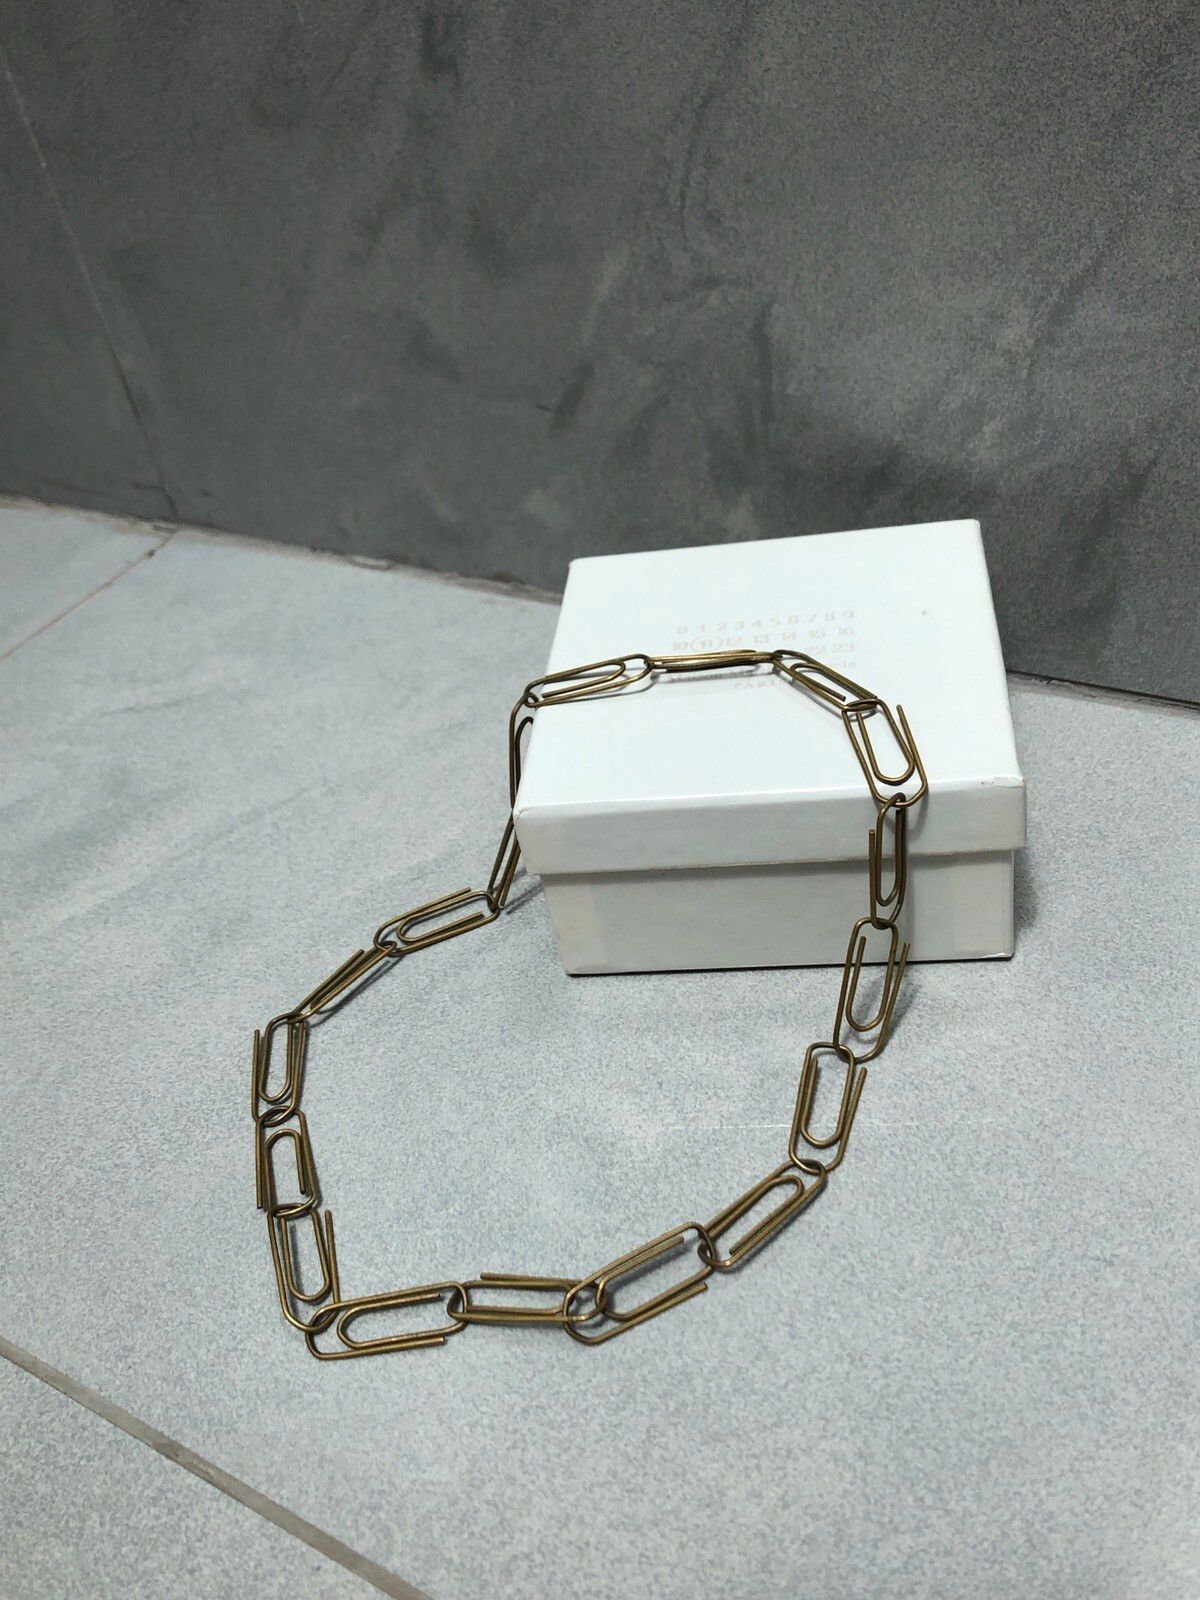 Maison Margiela A/W 07 Gold-toned Brass “Paper Clip” Necklace Size ONE SIZE - 2 Preview